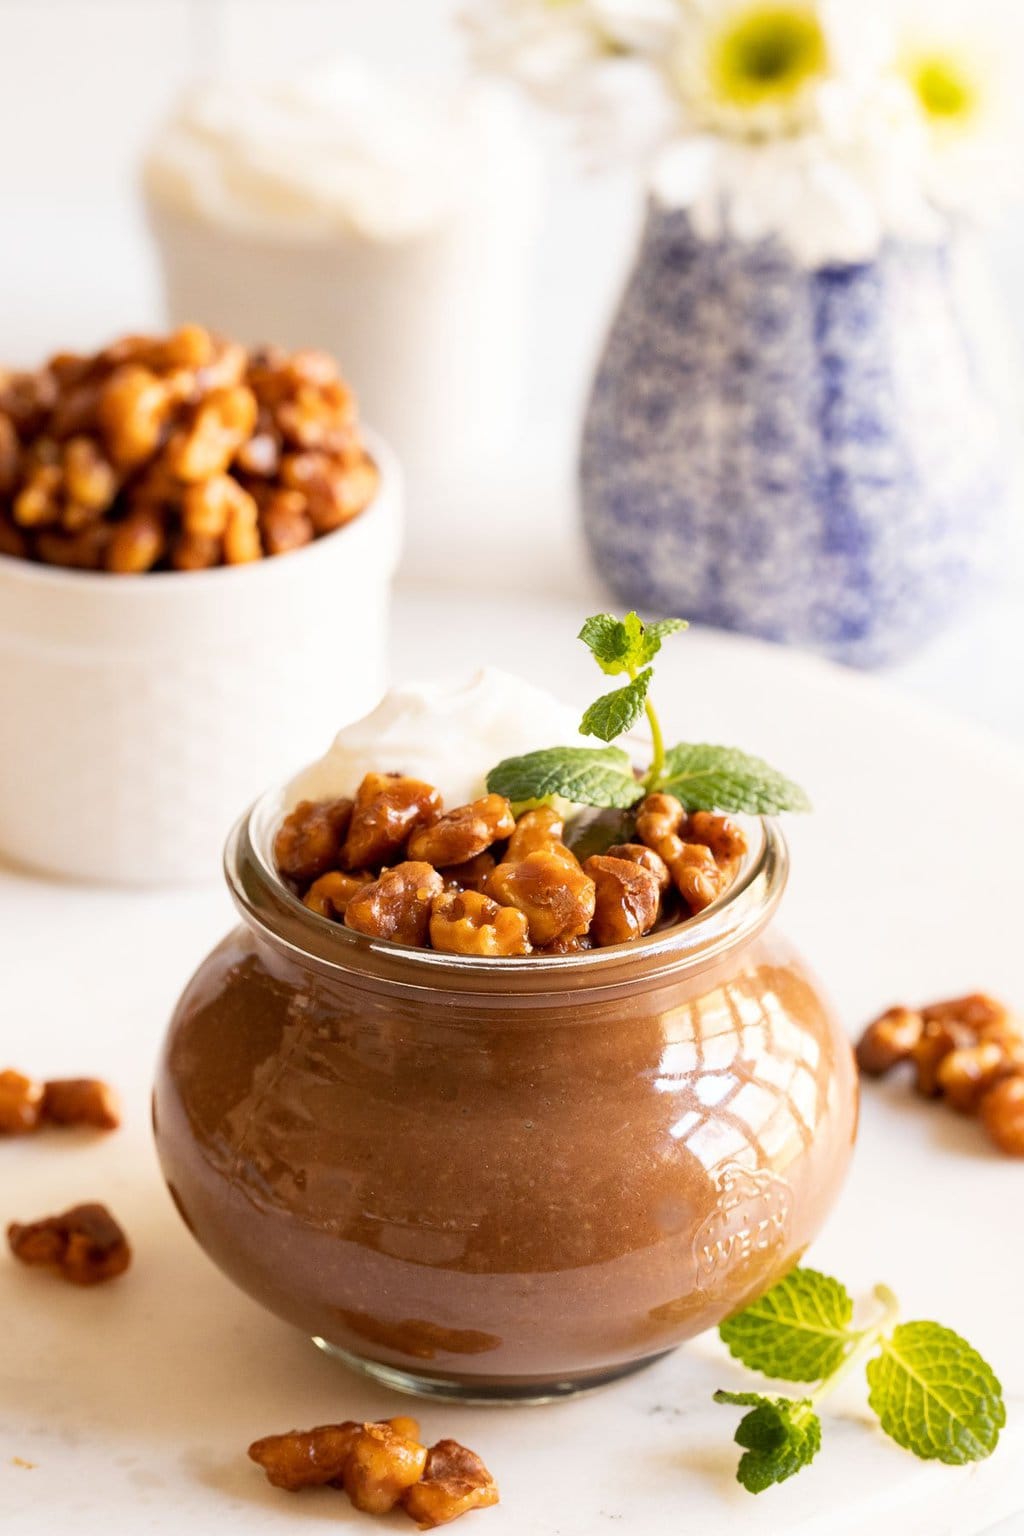 Vertical photo of Chocolate Budino in a glass Weck jar garnished with Candied Maple Walnuts.